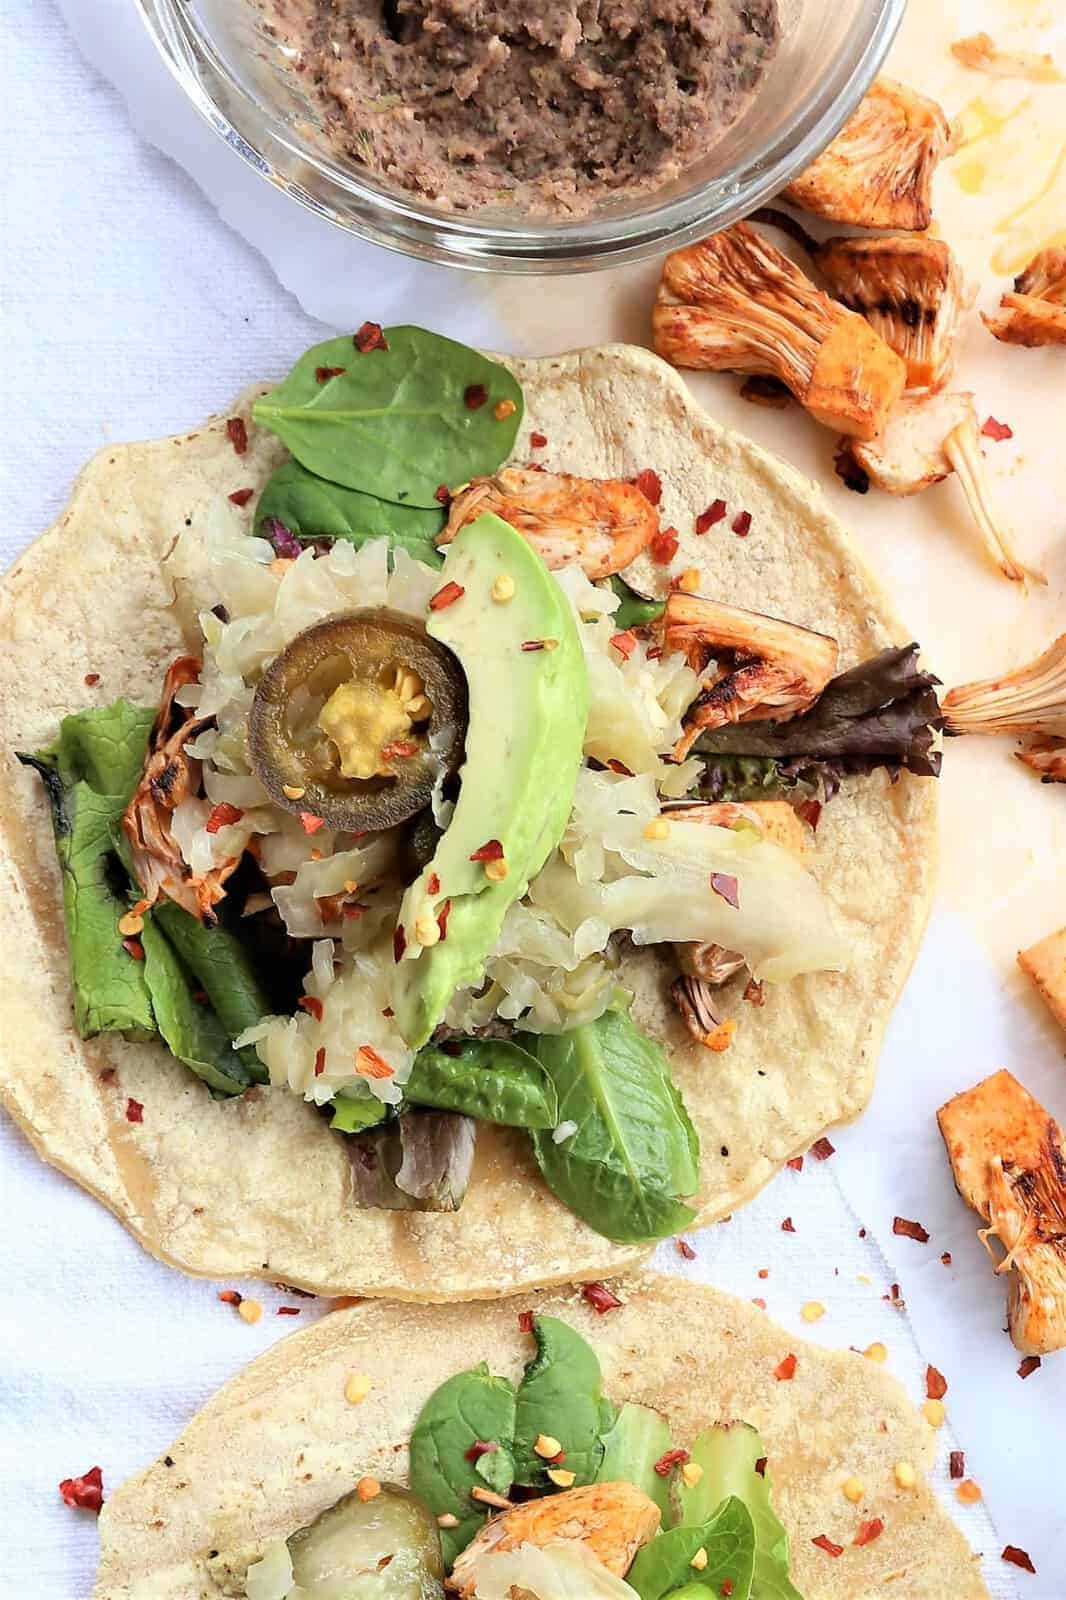 Grilled Jackfruit Tacos are ready in 30 minutes. Vegan, gf,dairy free. Yum!